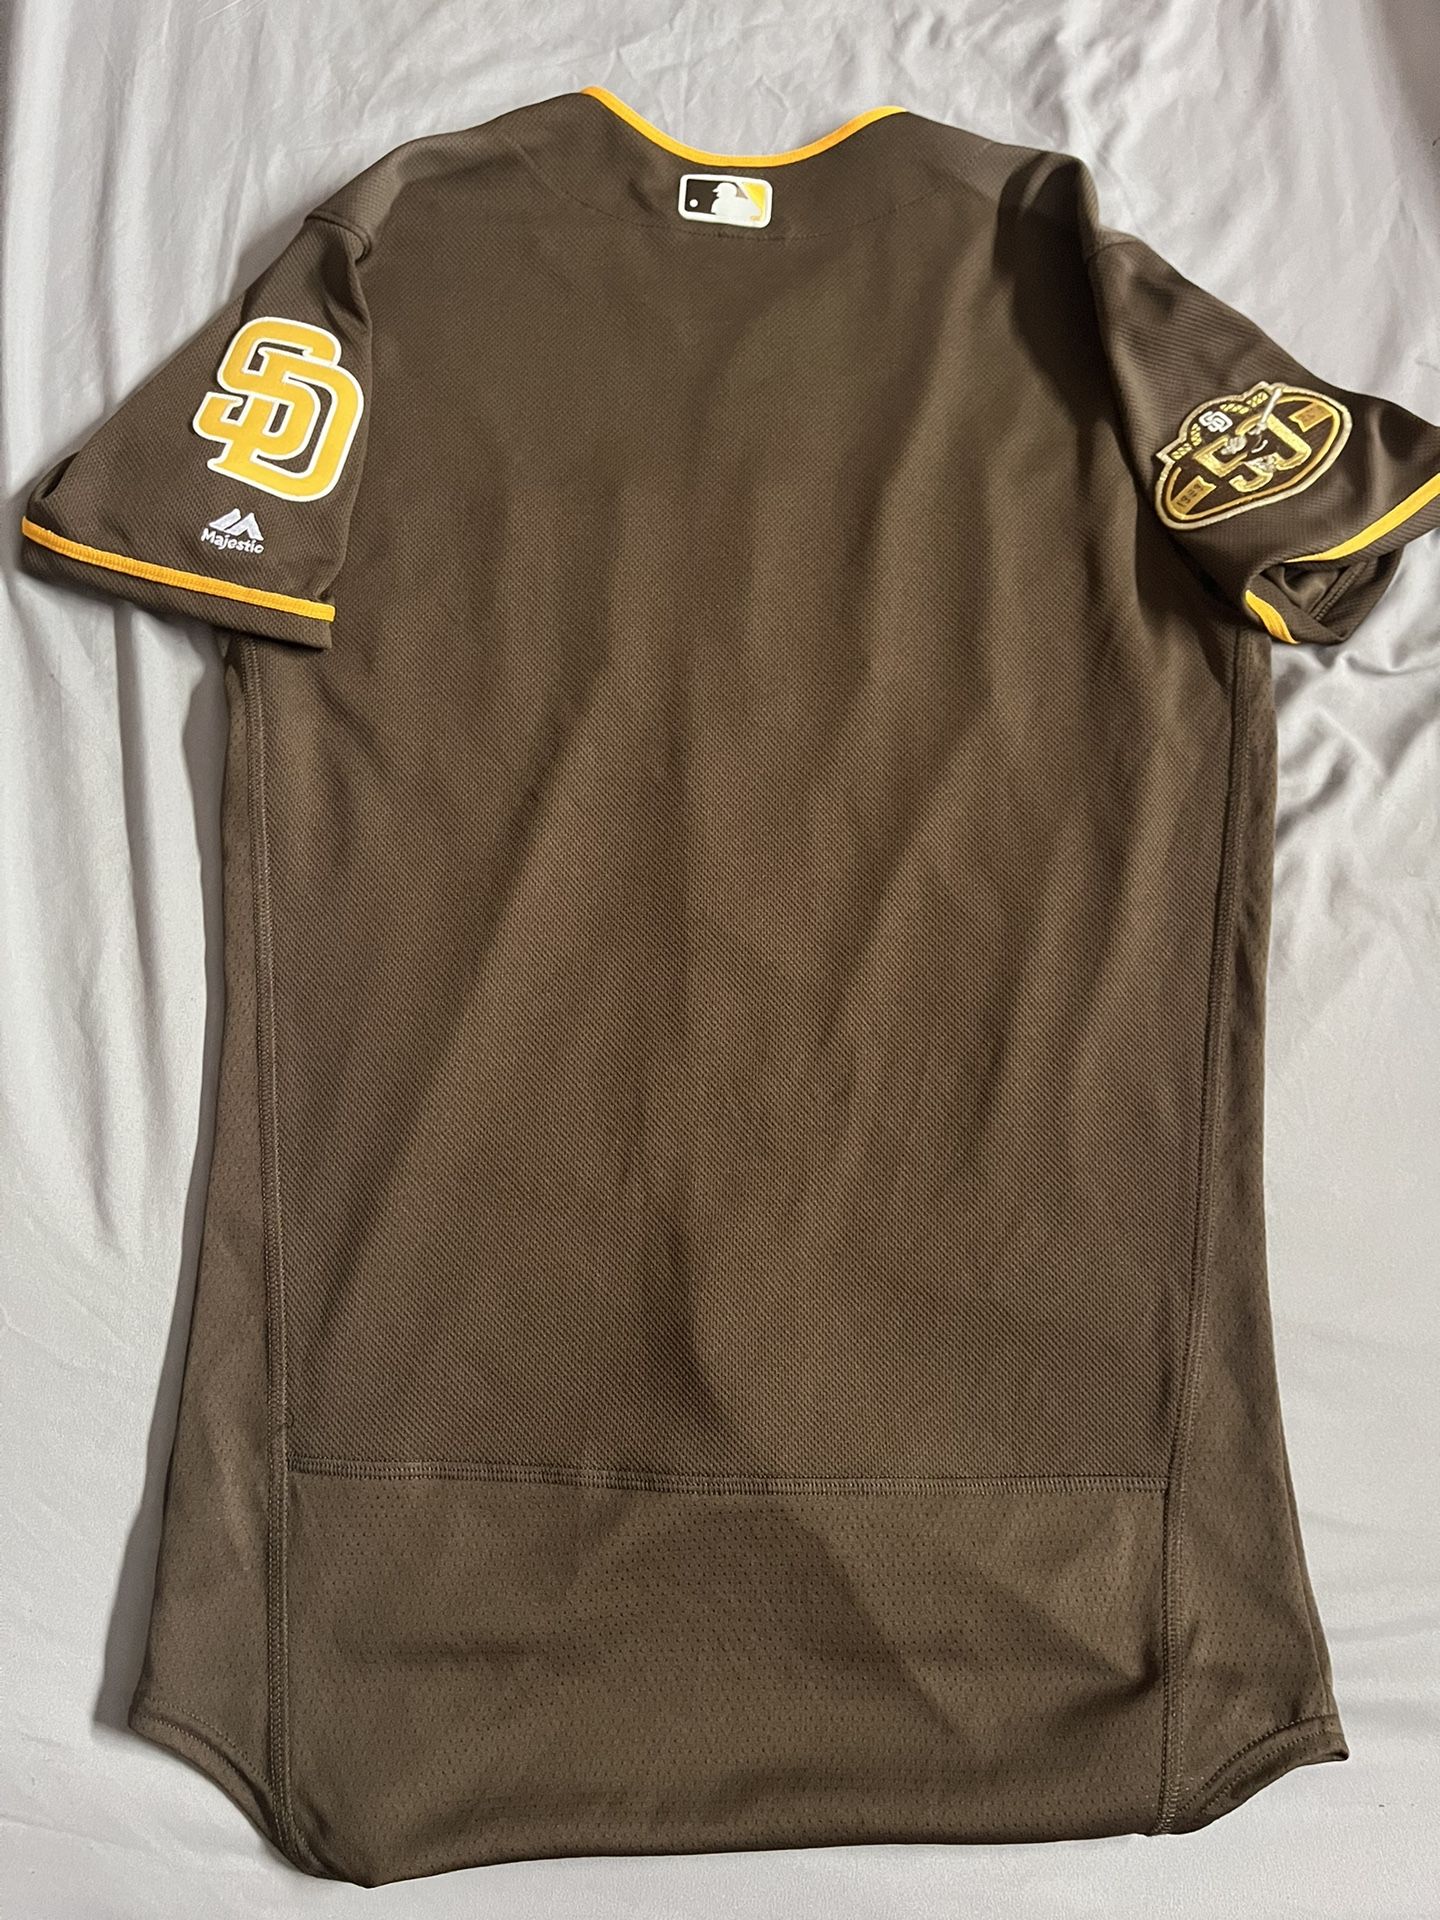 Mens MLB San Diego Padres Authentic On Field Flex Base Jersey - Brown  Alternate for Sale in San Diego, CA - OfferUp